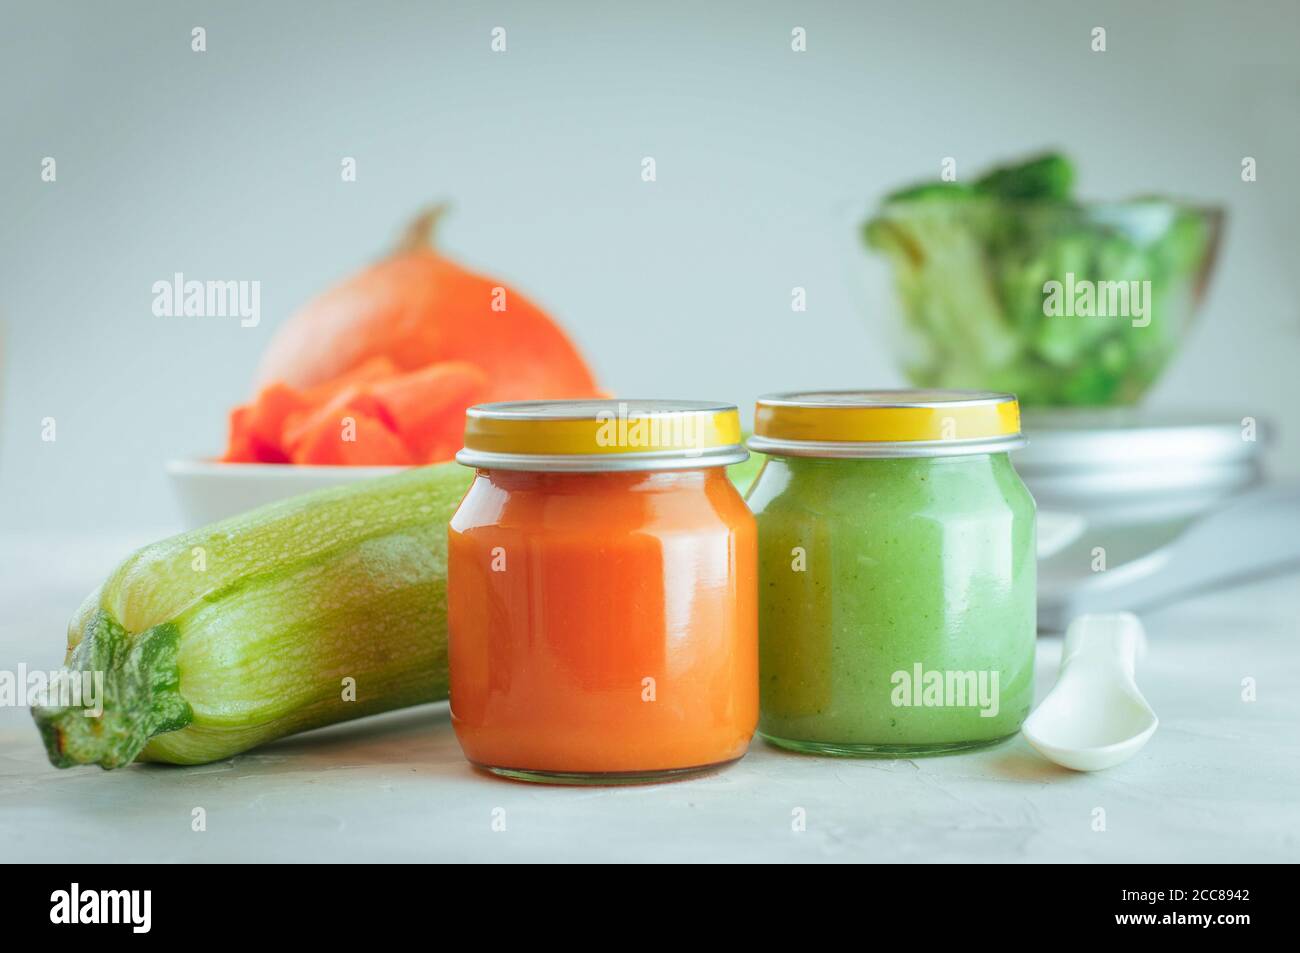 Download Baby Food Jars High Resolution Stock Photography And Images Alamy PSD Mockup Templates